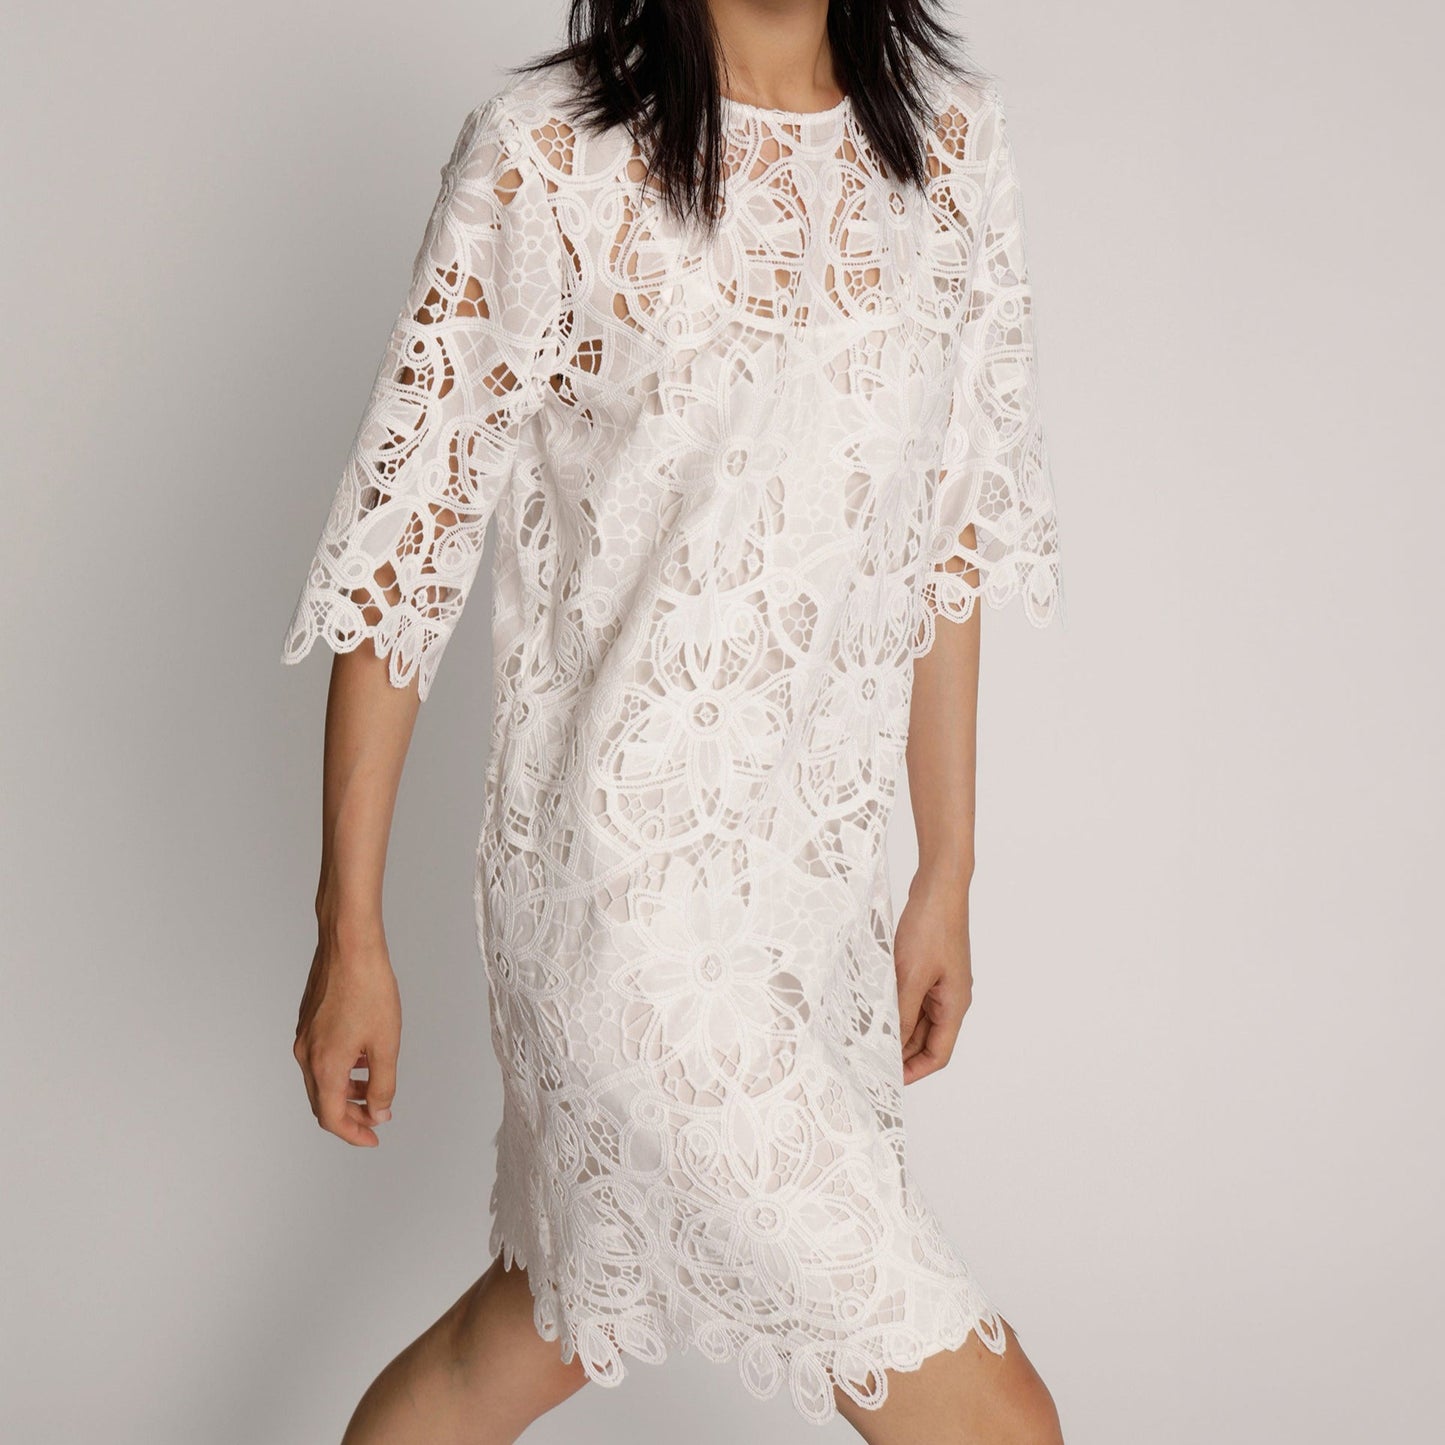 Lisol Lace Dress in White